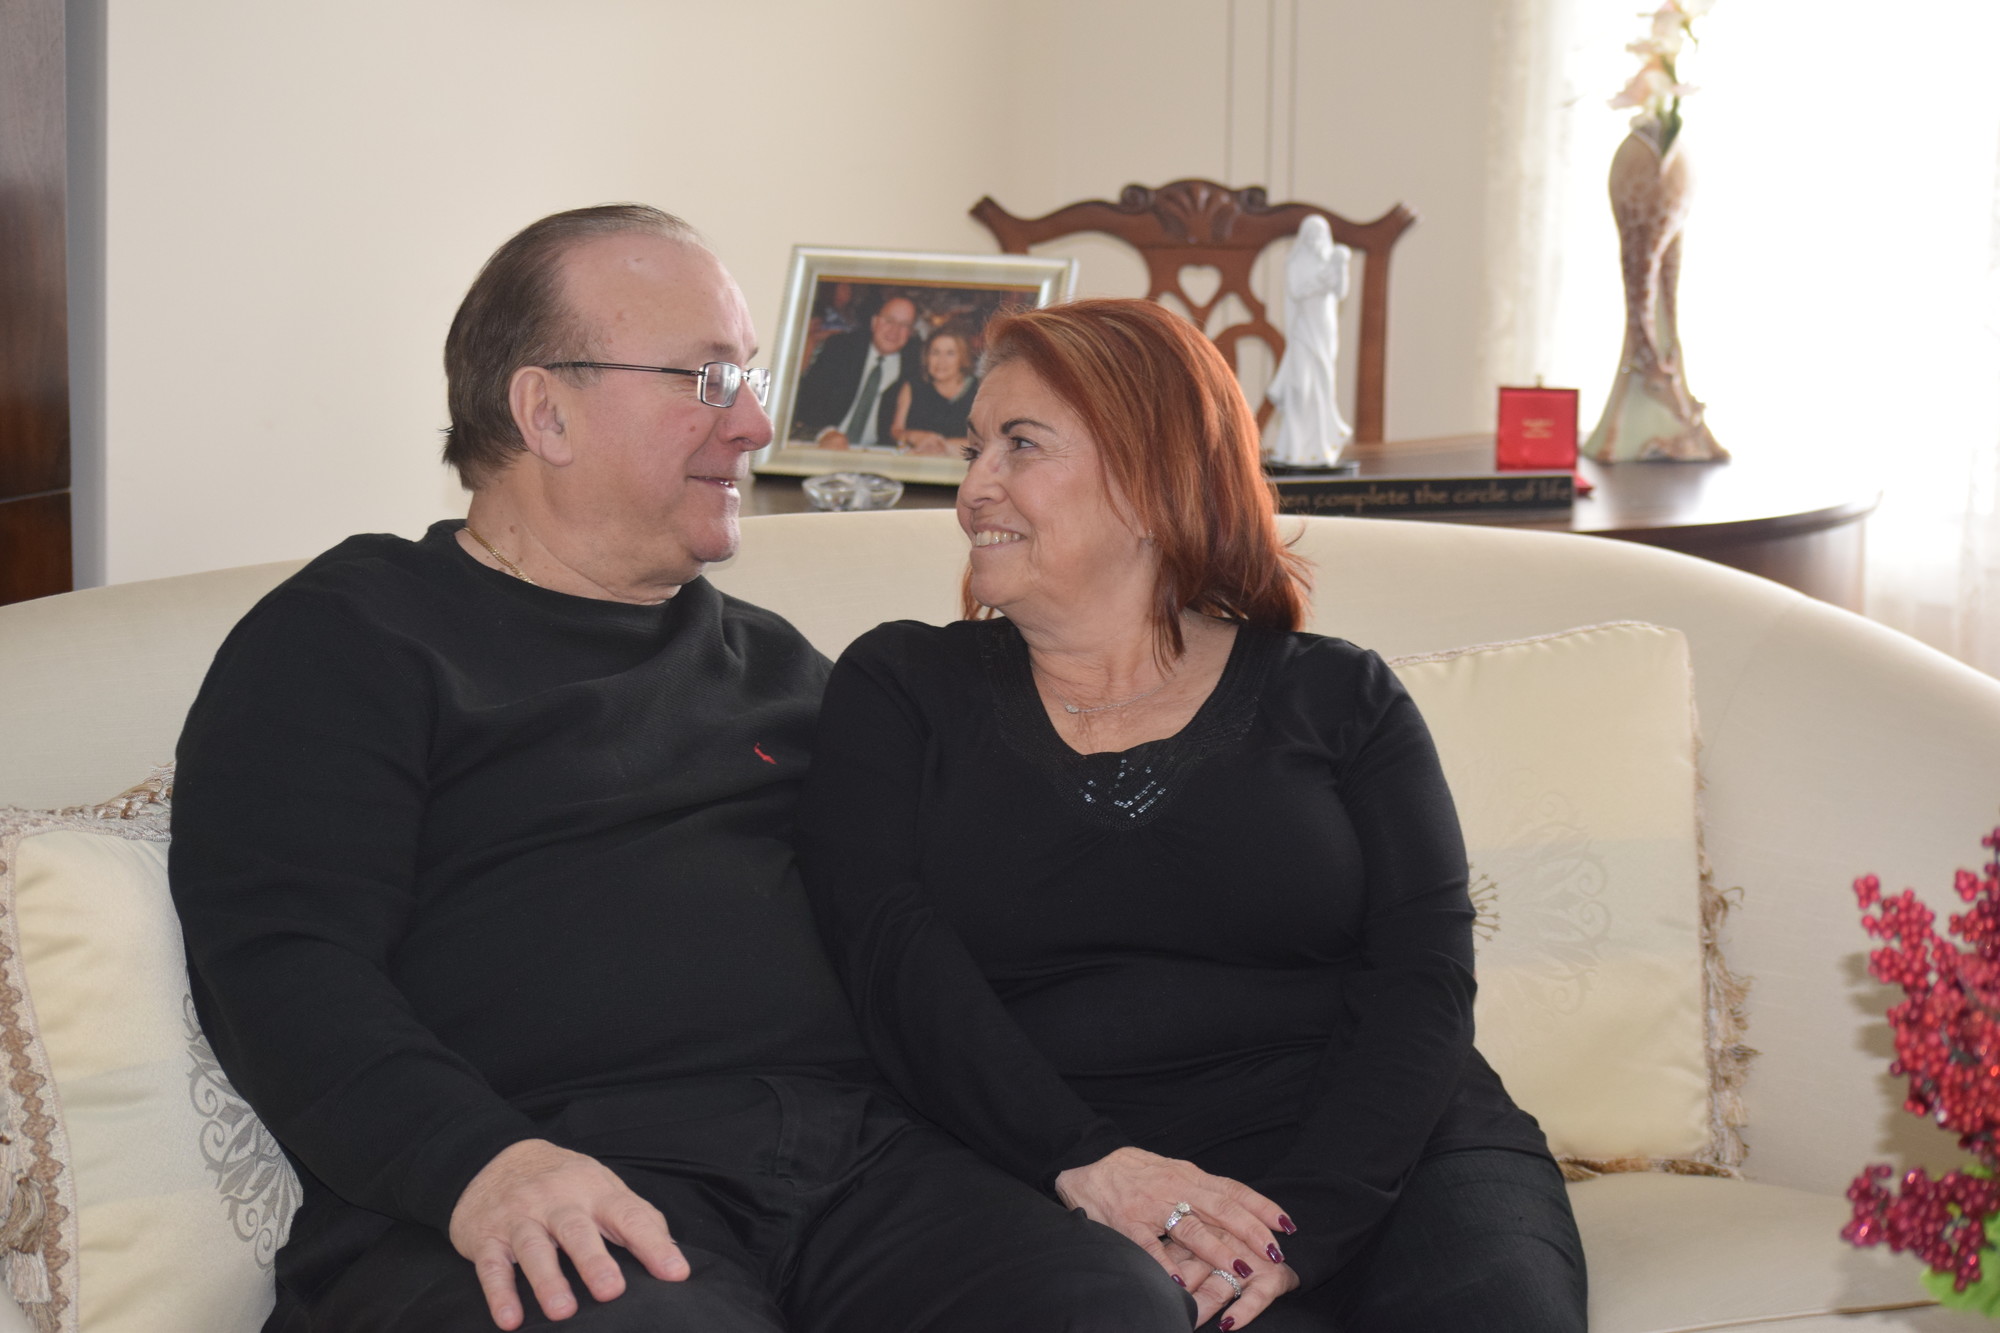 George and Josephine Pietramala, 71 and 67, look forward to spending Valentine’s Day in Manhattan at their favorite Italian restaurant, Il Vagabondo, and rooting on the Rangers at the Sunday game.